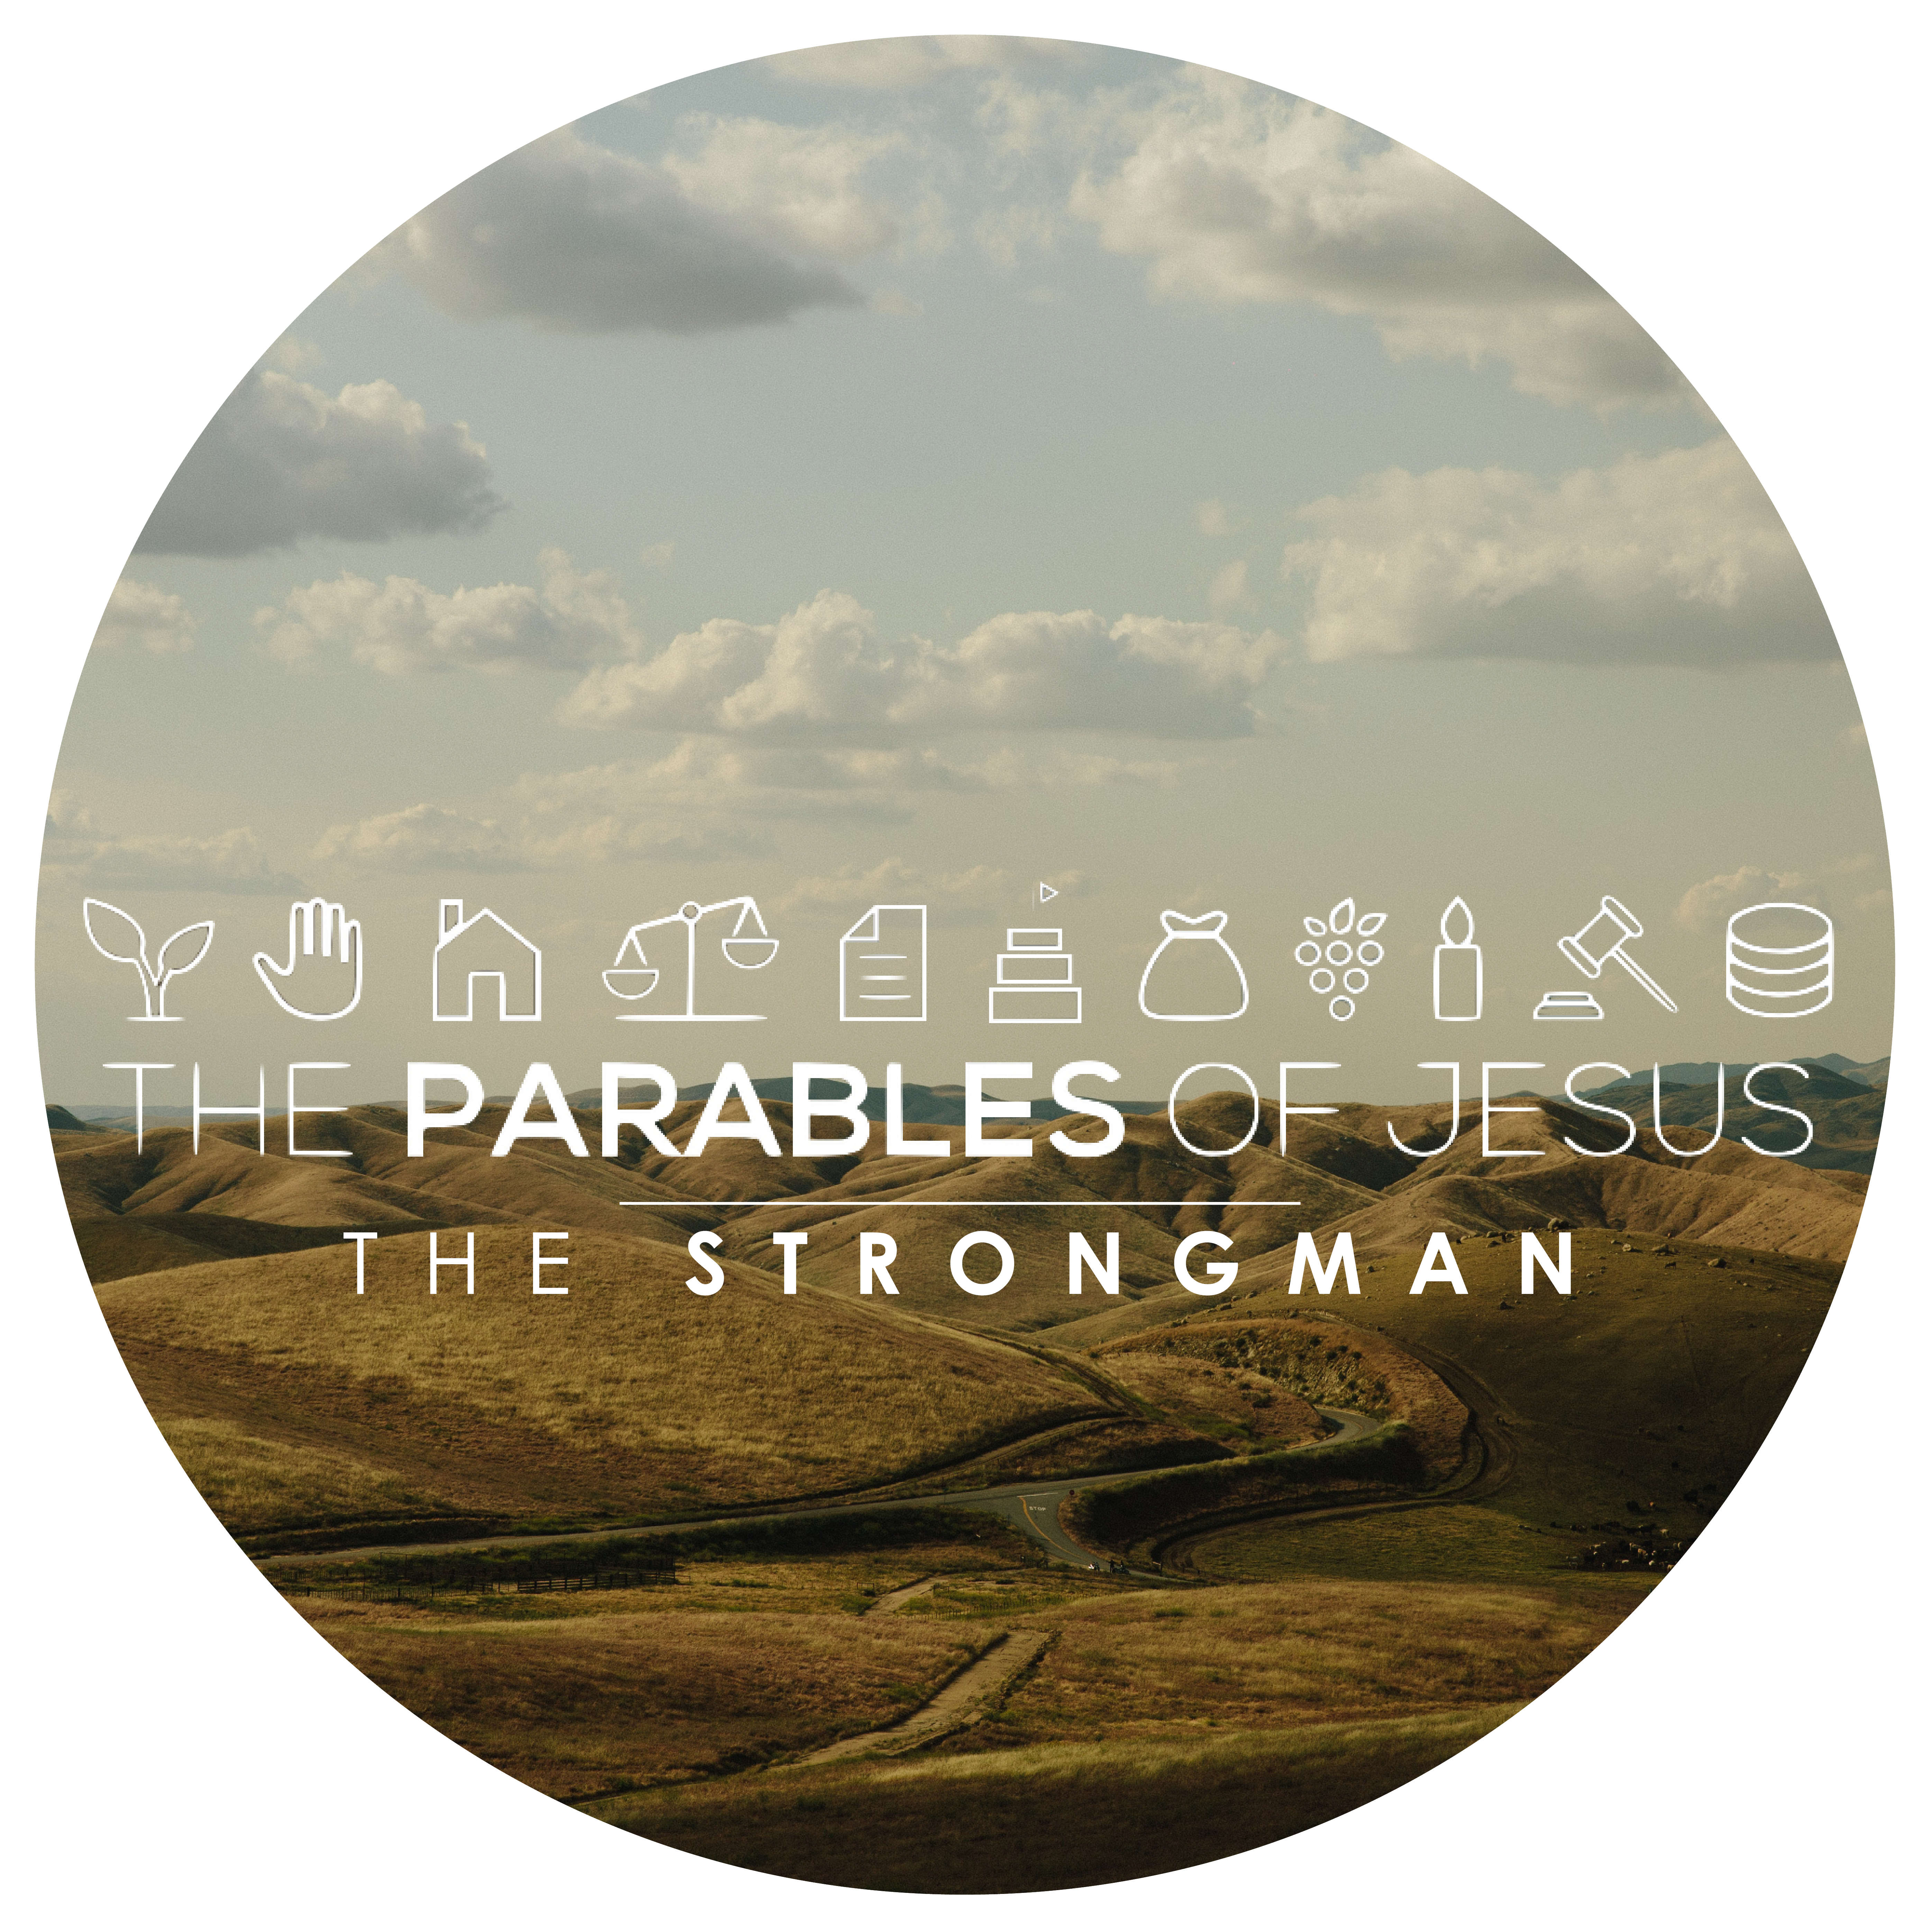 Parables Week 2: The Strongman